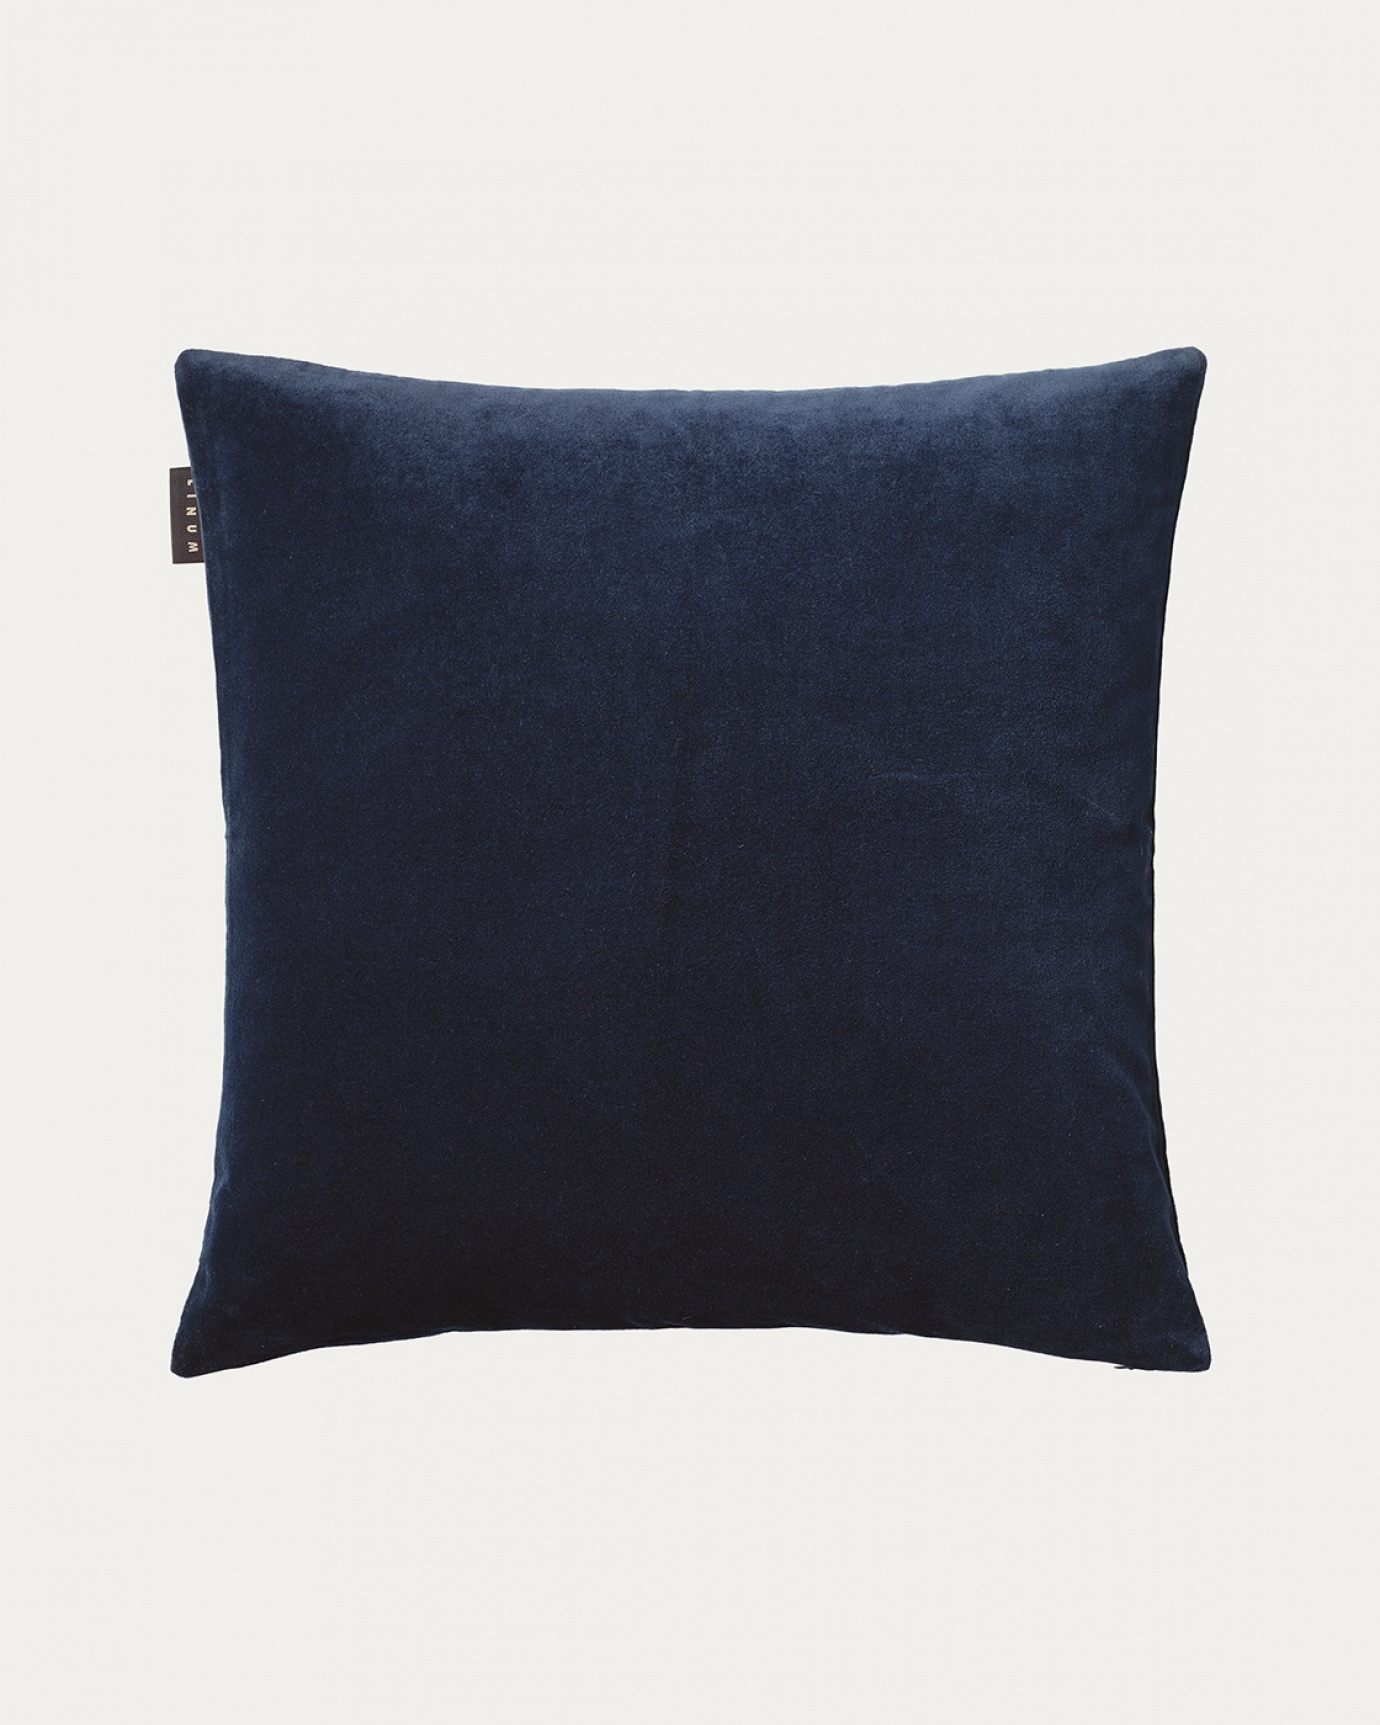 Product image ink blue PAOLO cushion cover in soft cotton velvet from LINUM DESIGN. Size 50x50 cm.